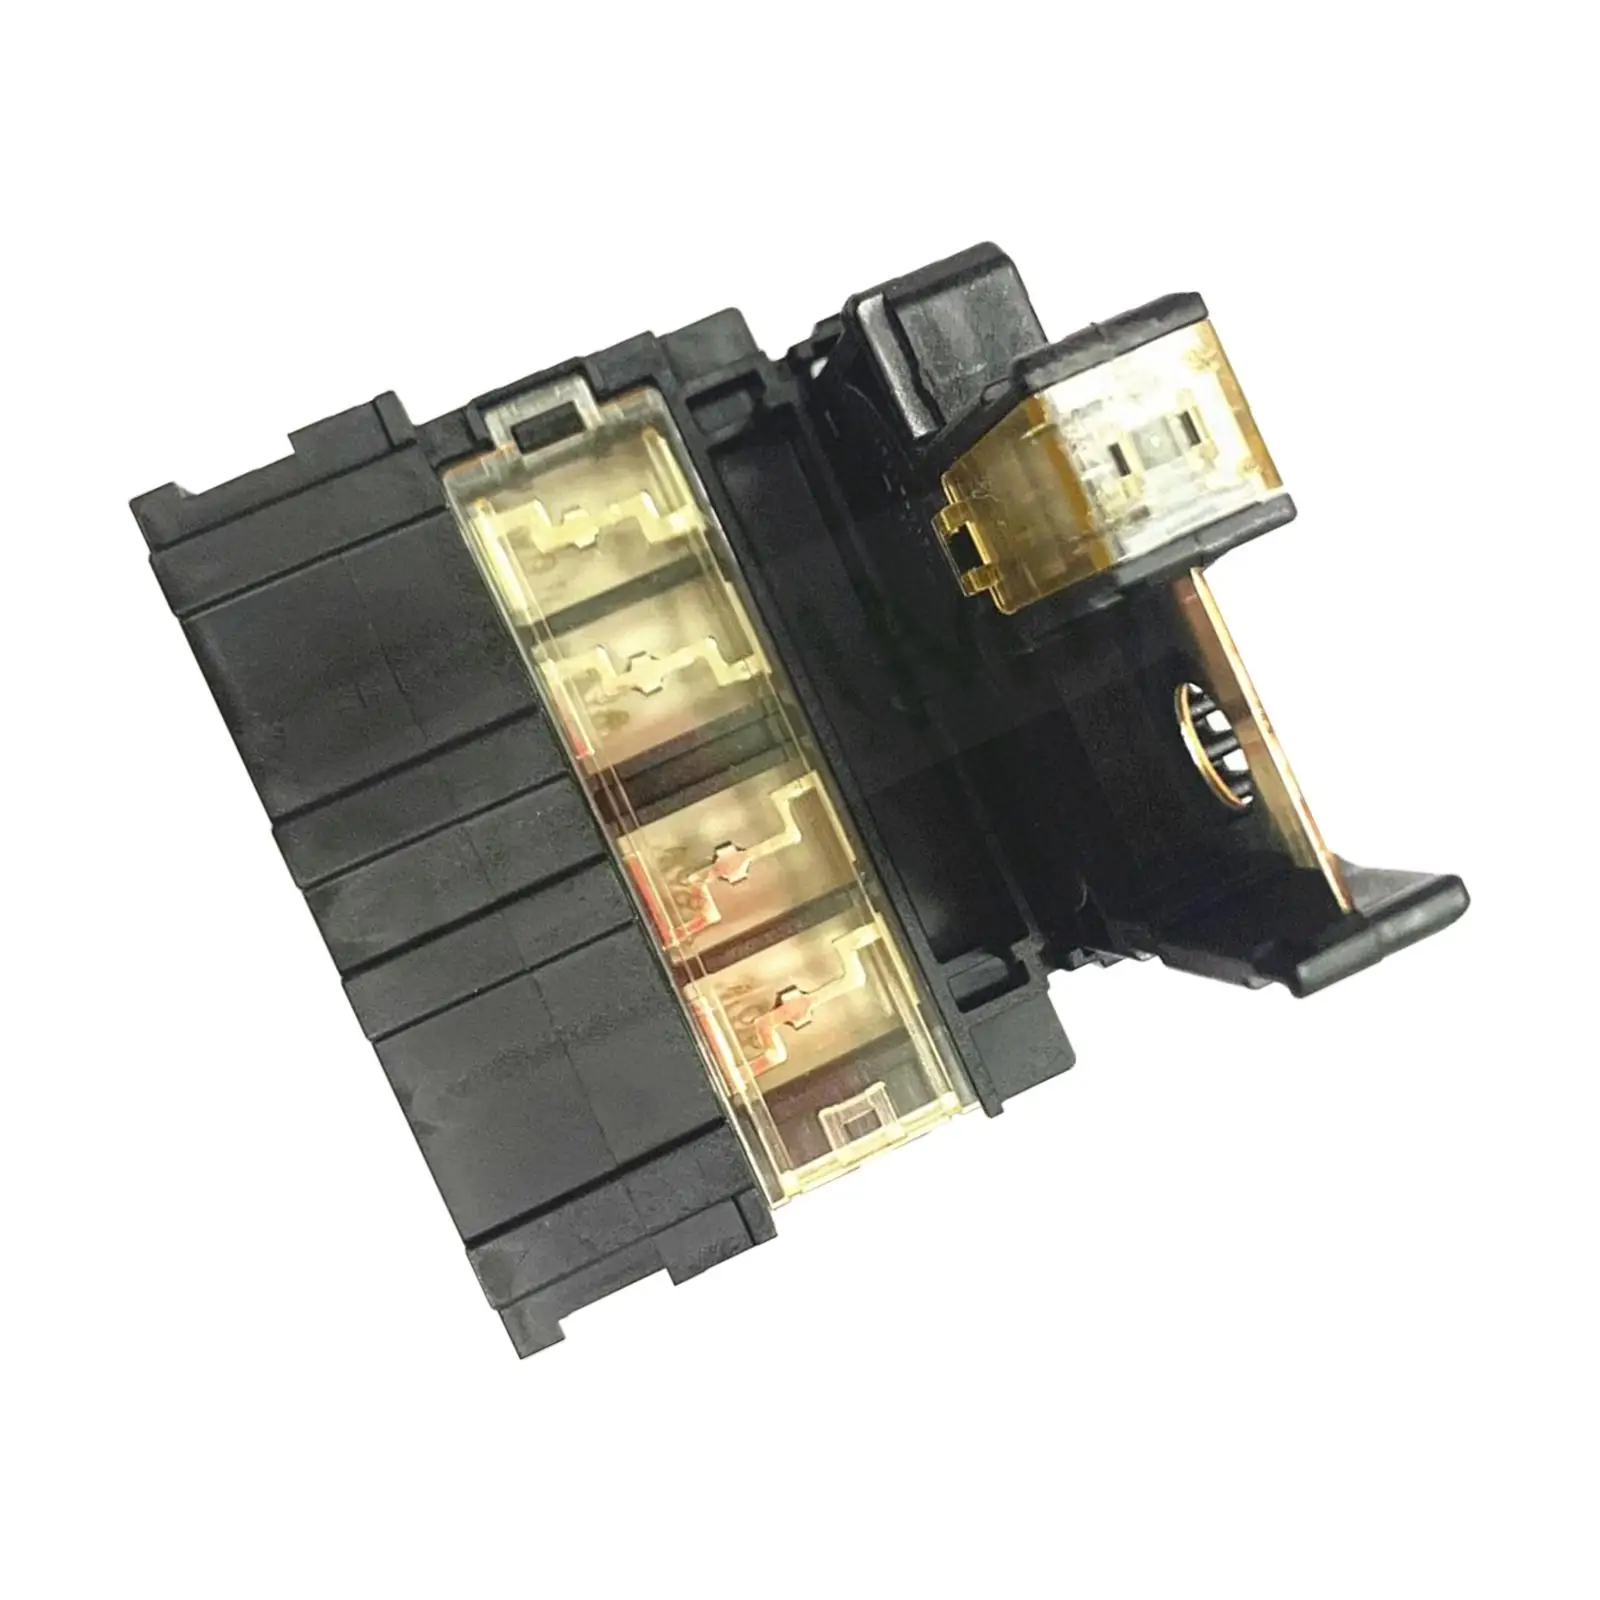 24380-79912 24340-ja74A High Performance Battery Circuit Fuse Replaces Premium